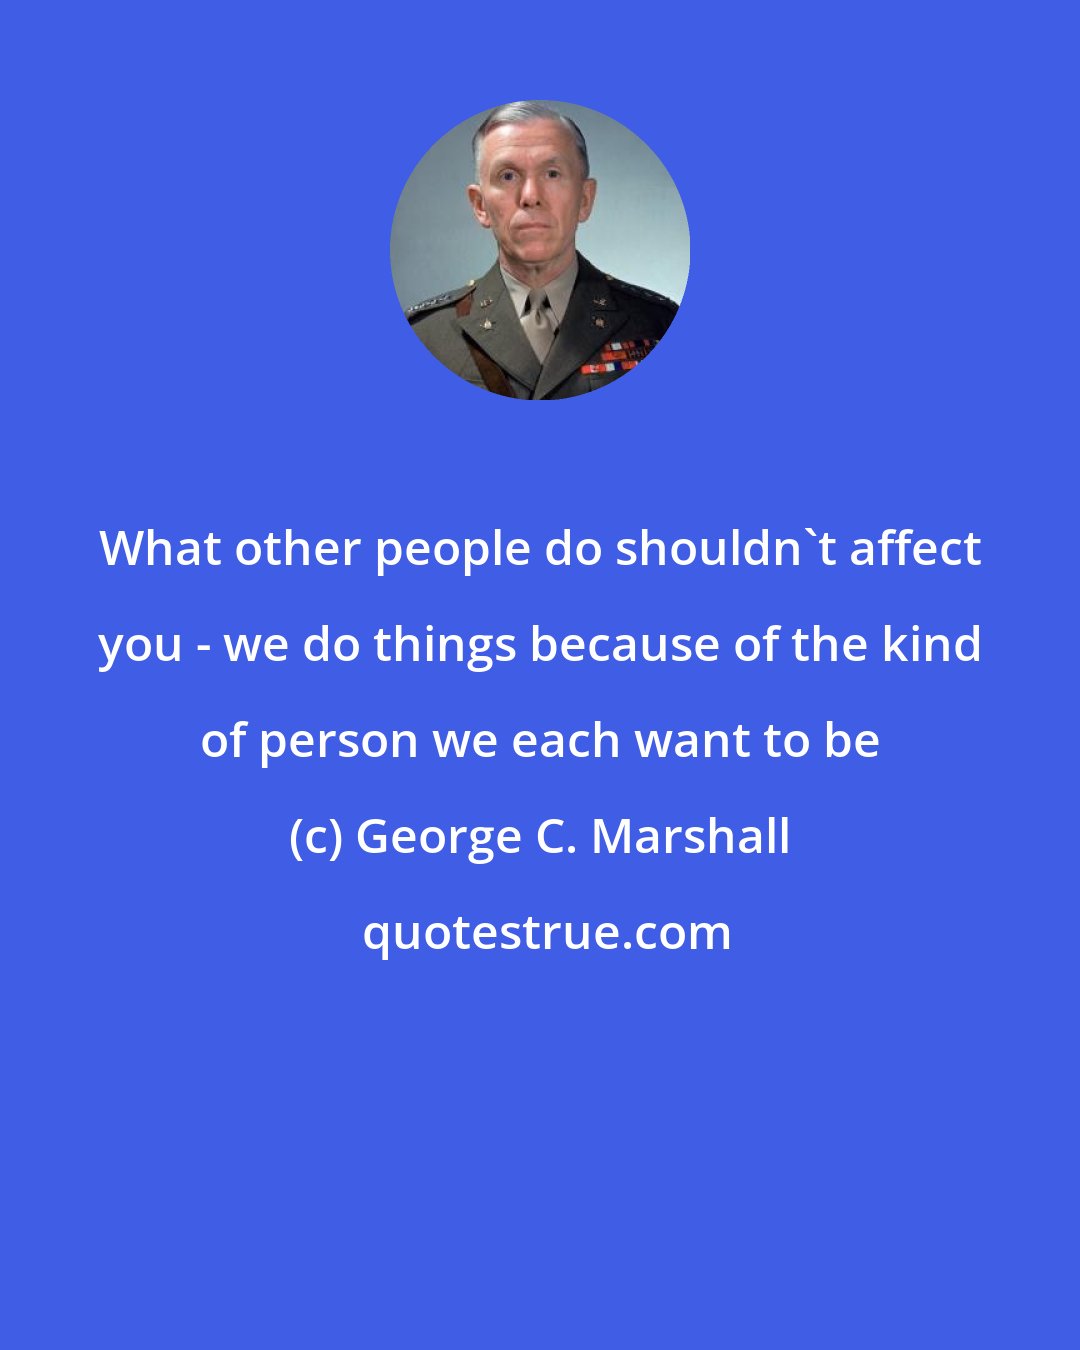 George C. Marshall: What other people do shouldn't affect you - we do things because of the kind of person we each want to be